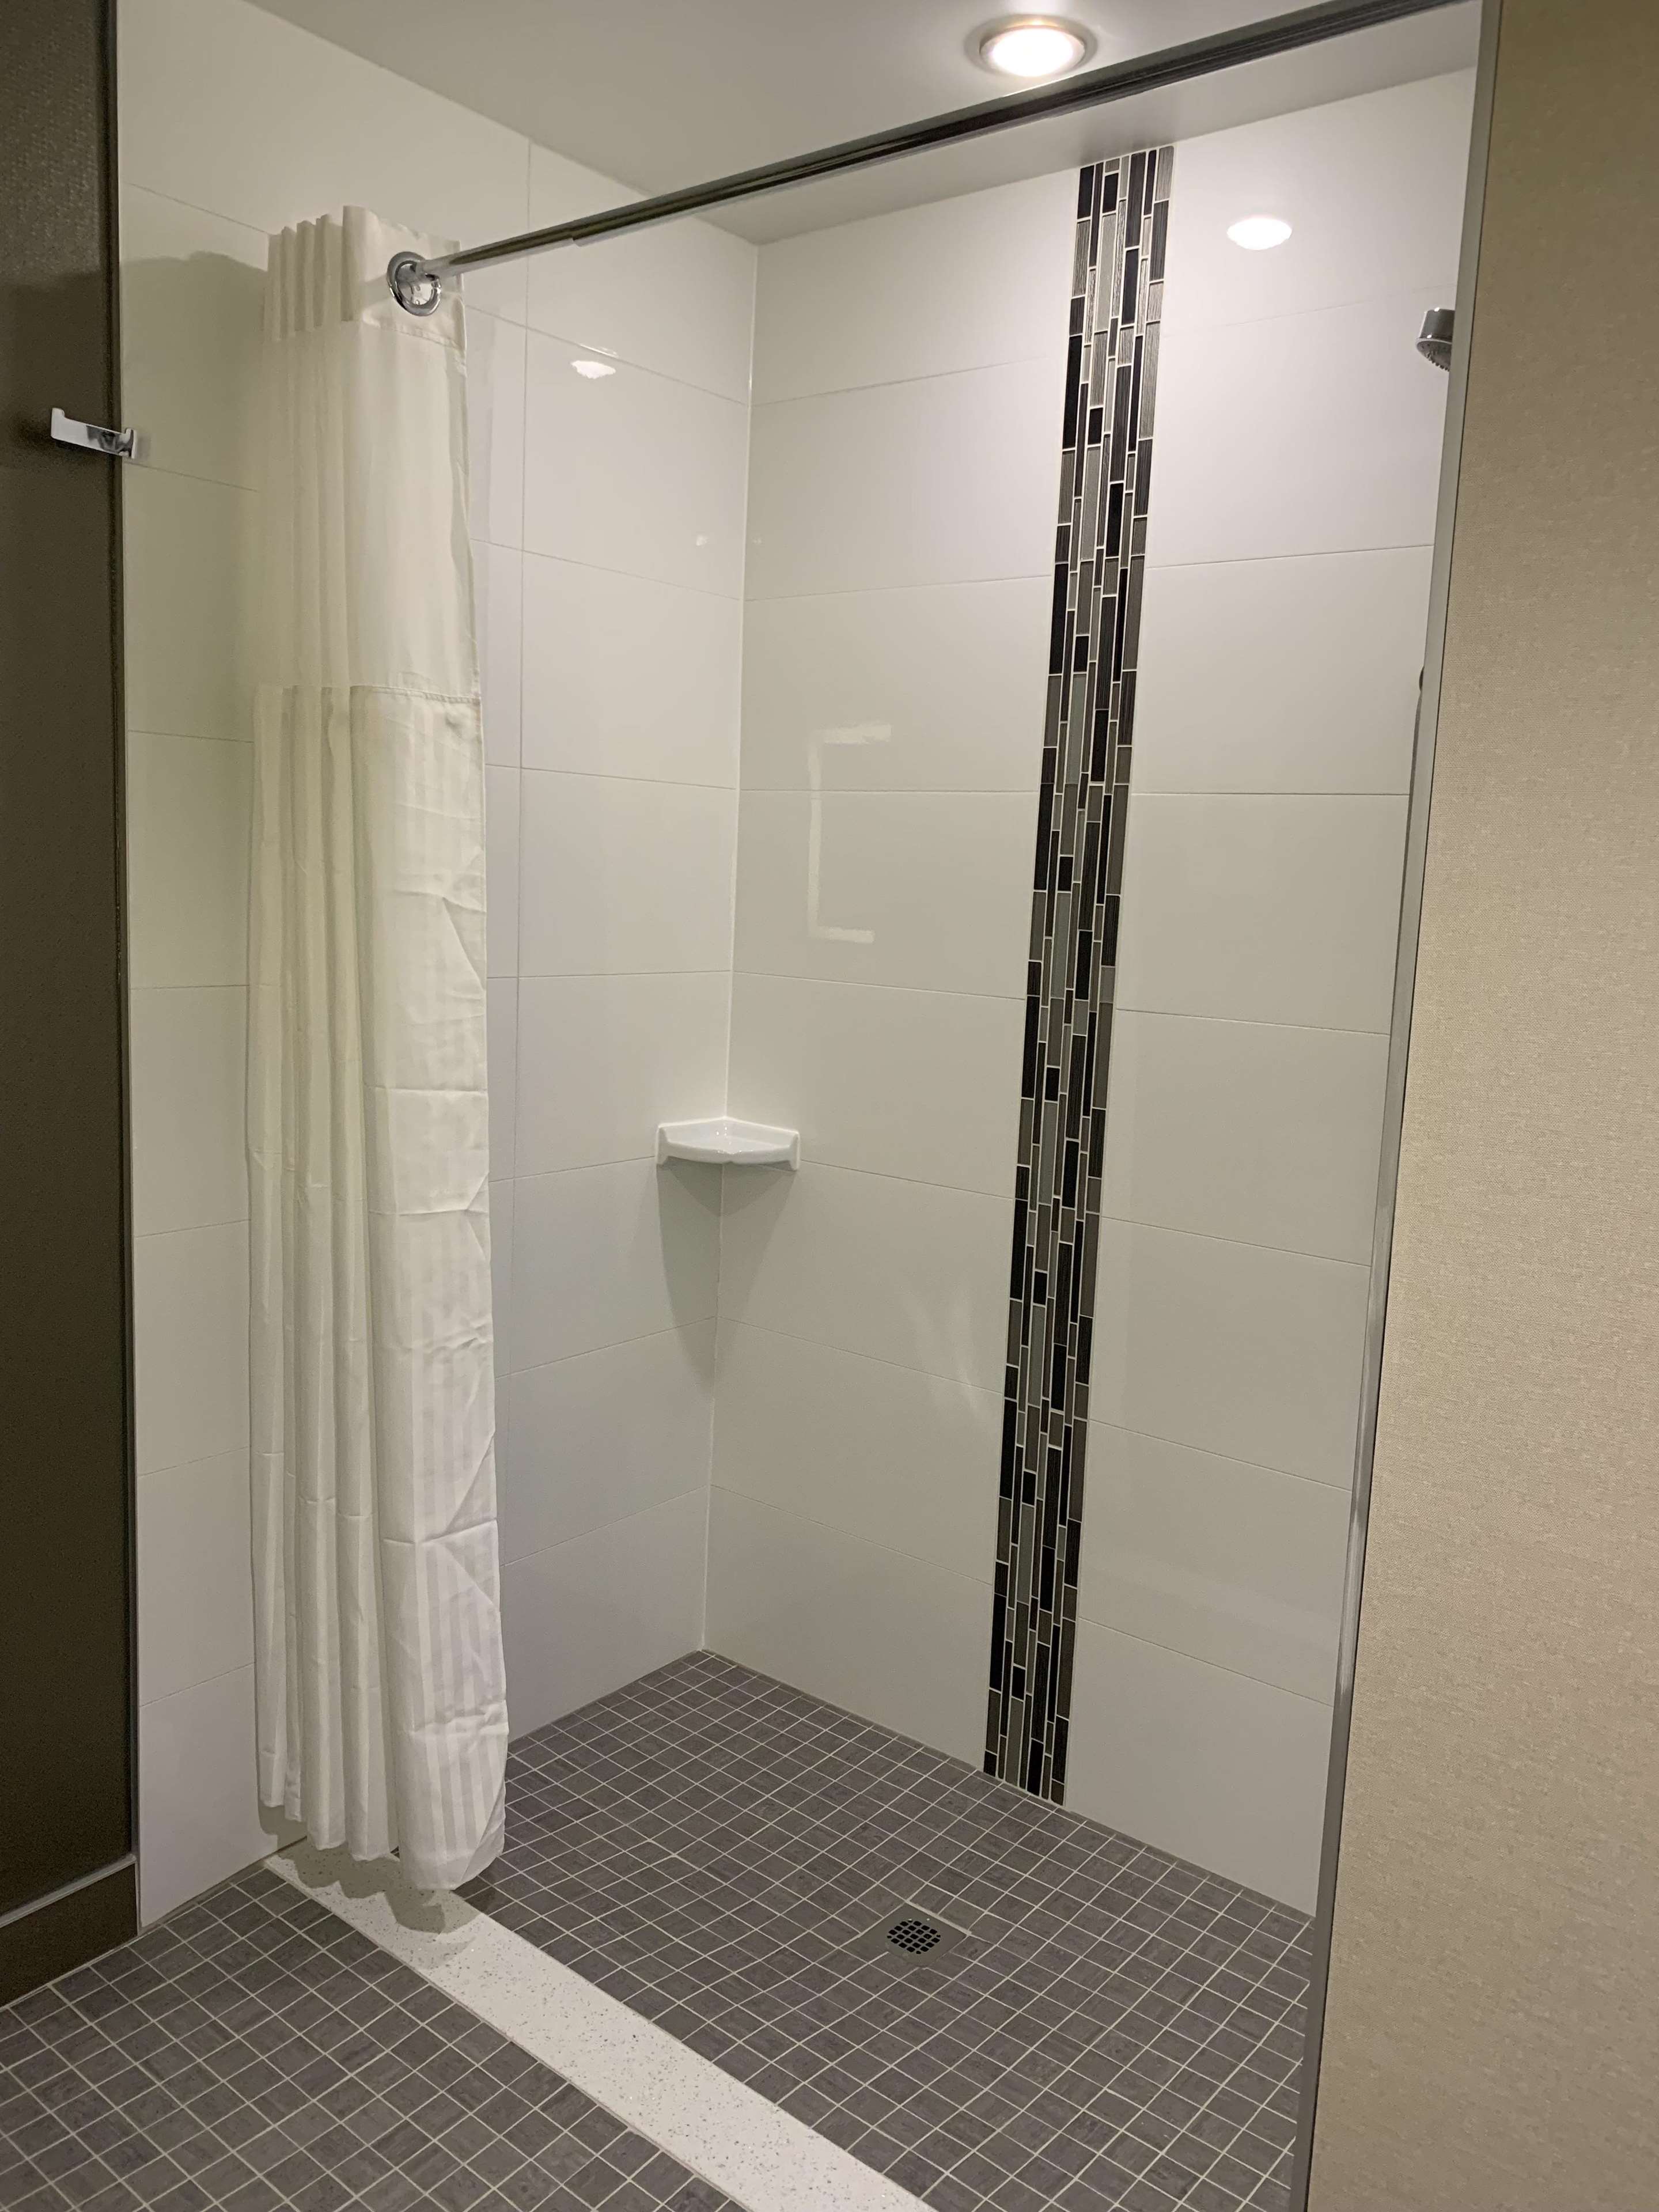 Accessible Room Bathroom with Roll-in Shower Best Western Plus Hinton Inn & Suites Hinton (780)817-7000